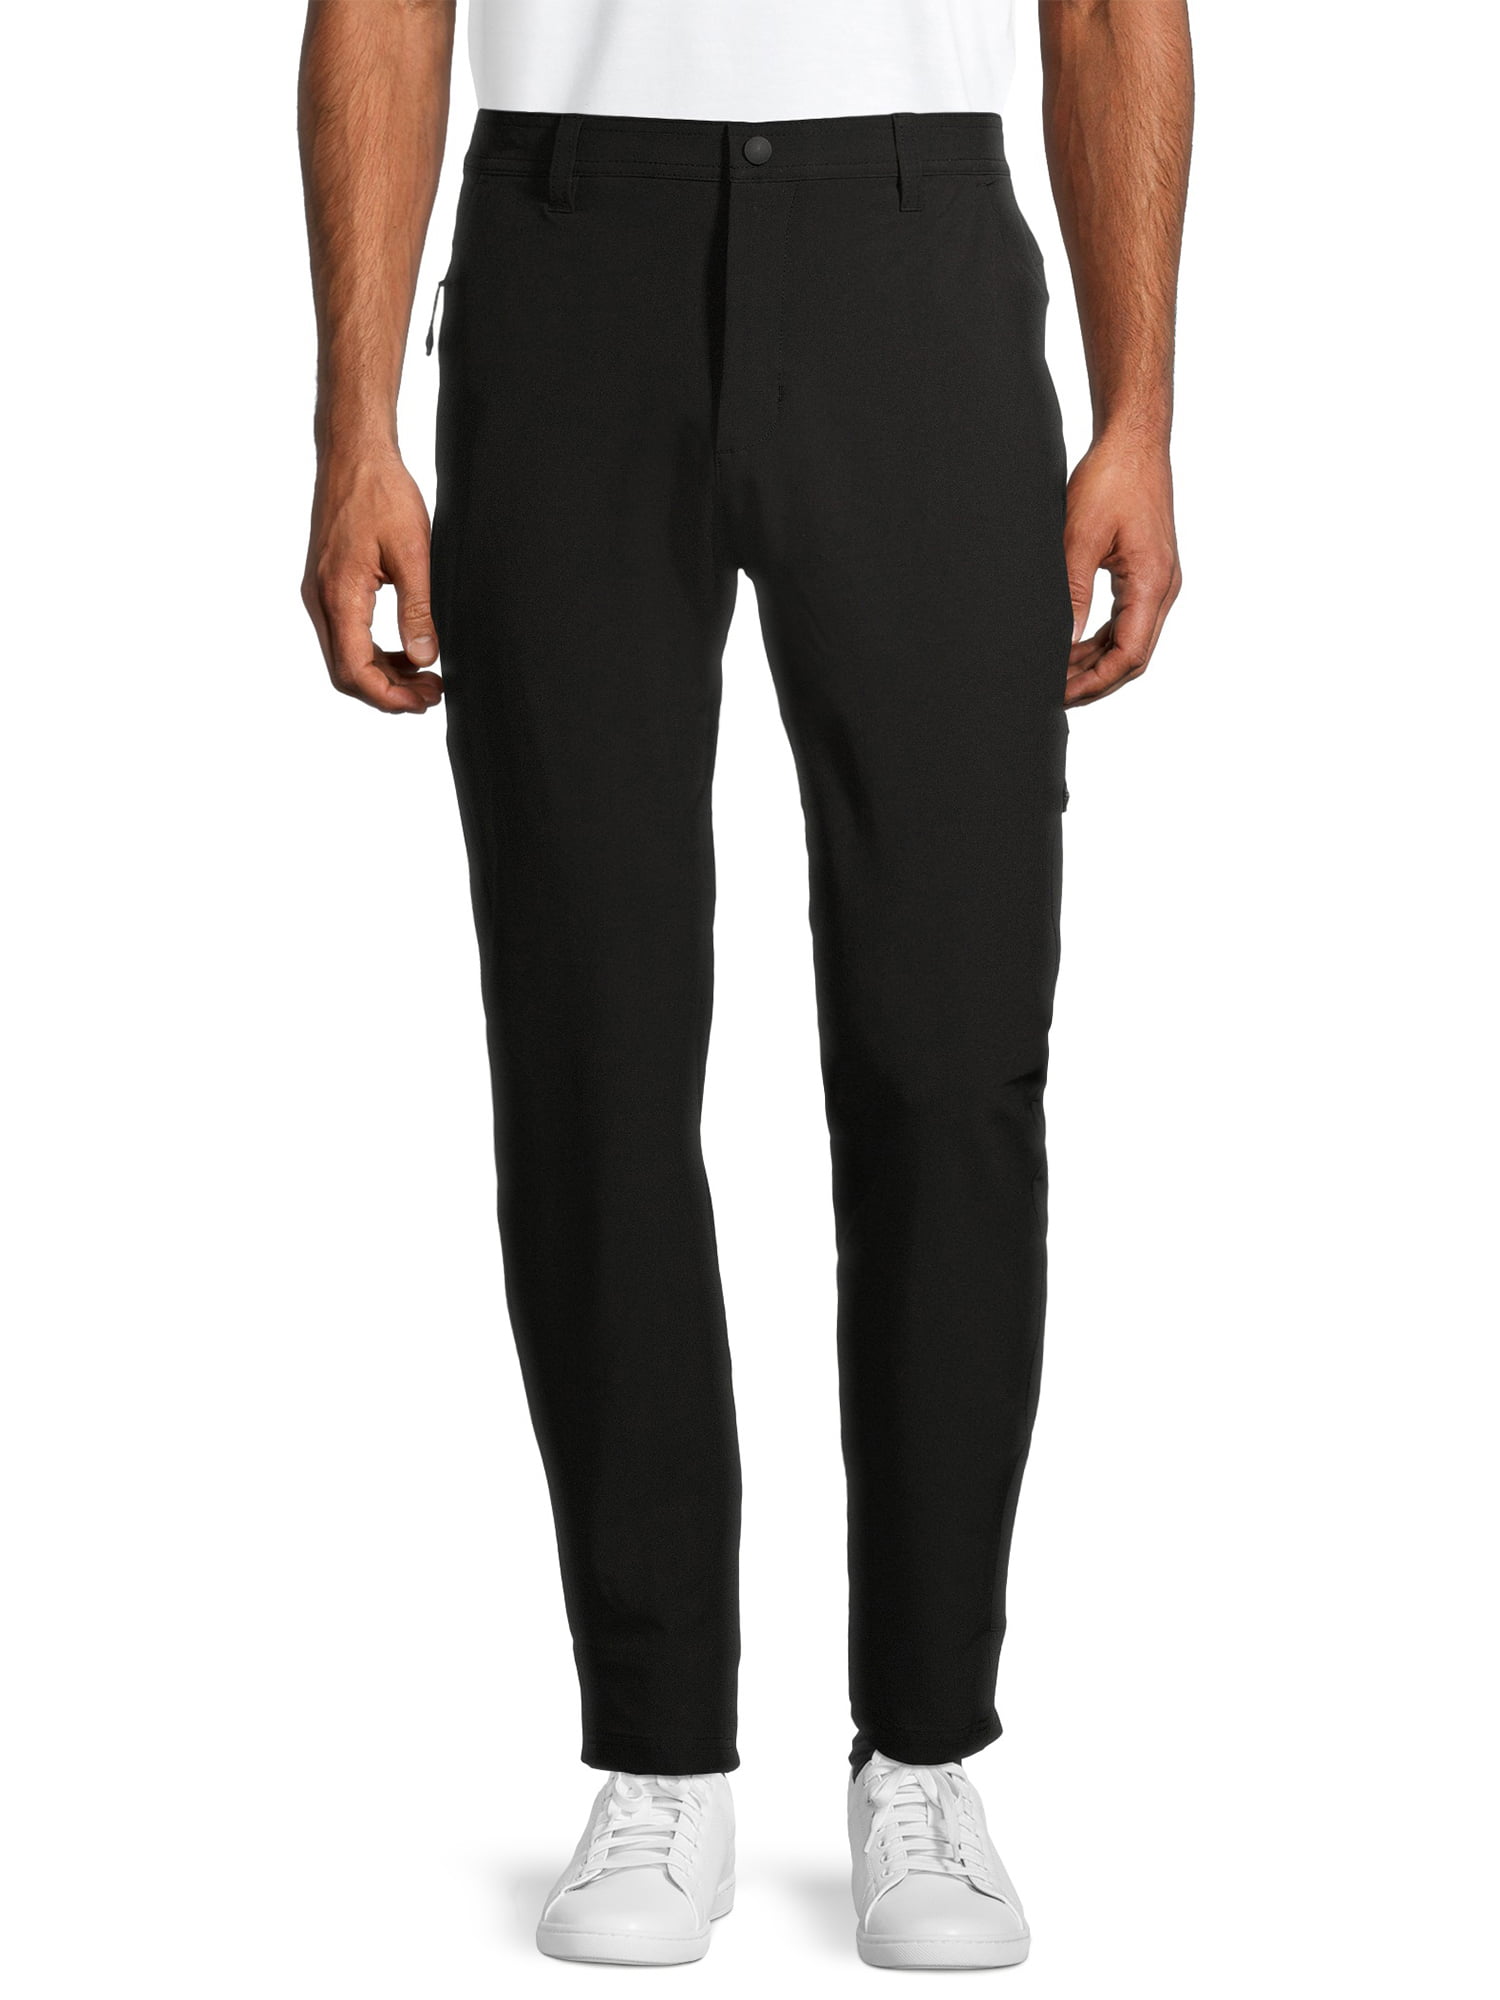 Russell - Russell Men's Athletic Woven Tech Pants, up to 5XL - Walmart ...